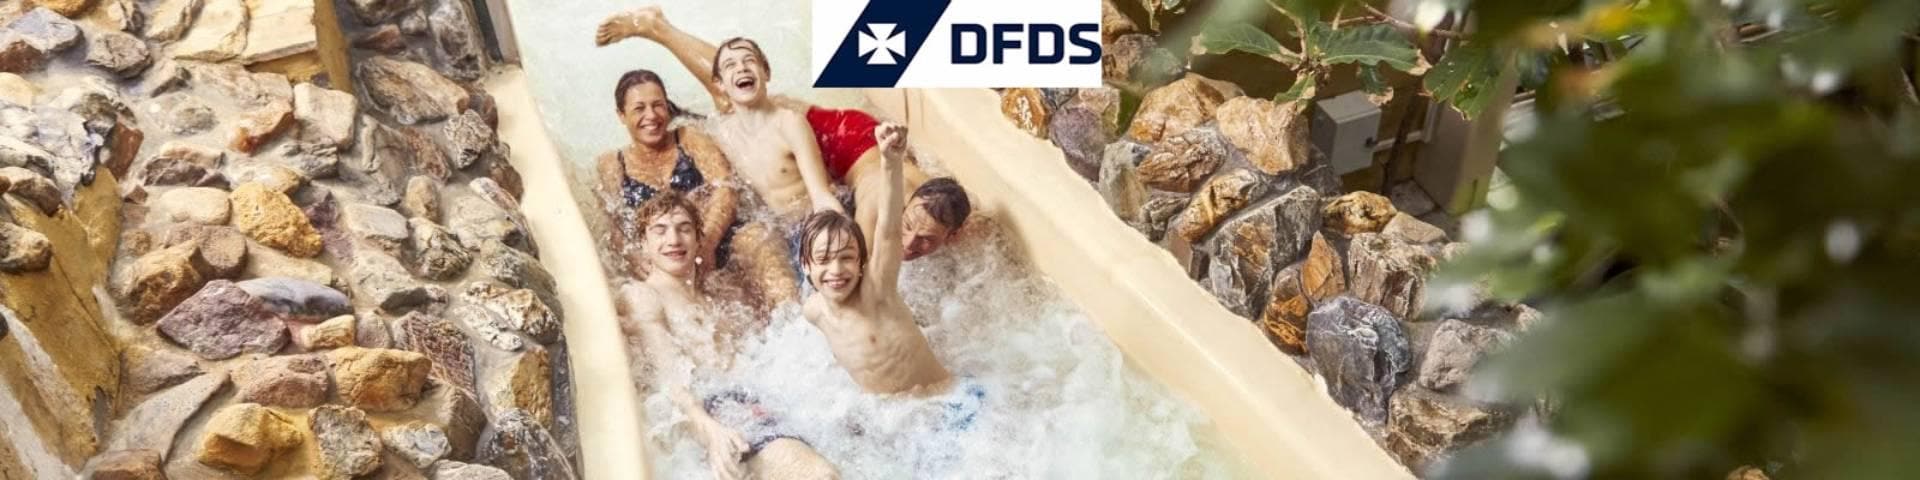 DFDS Wild water river